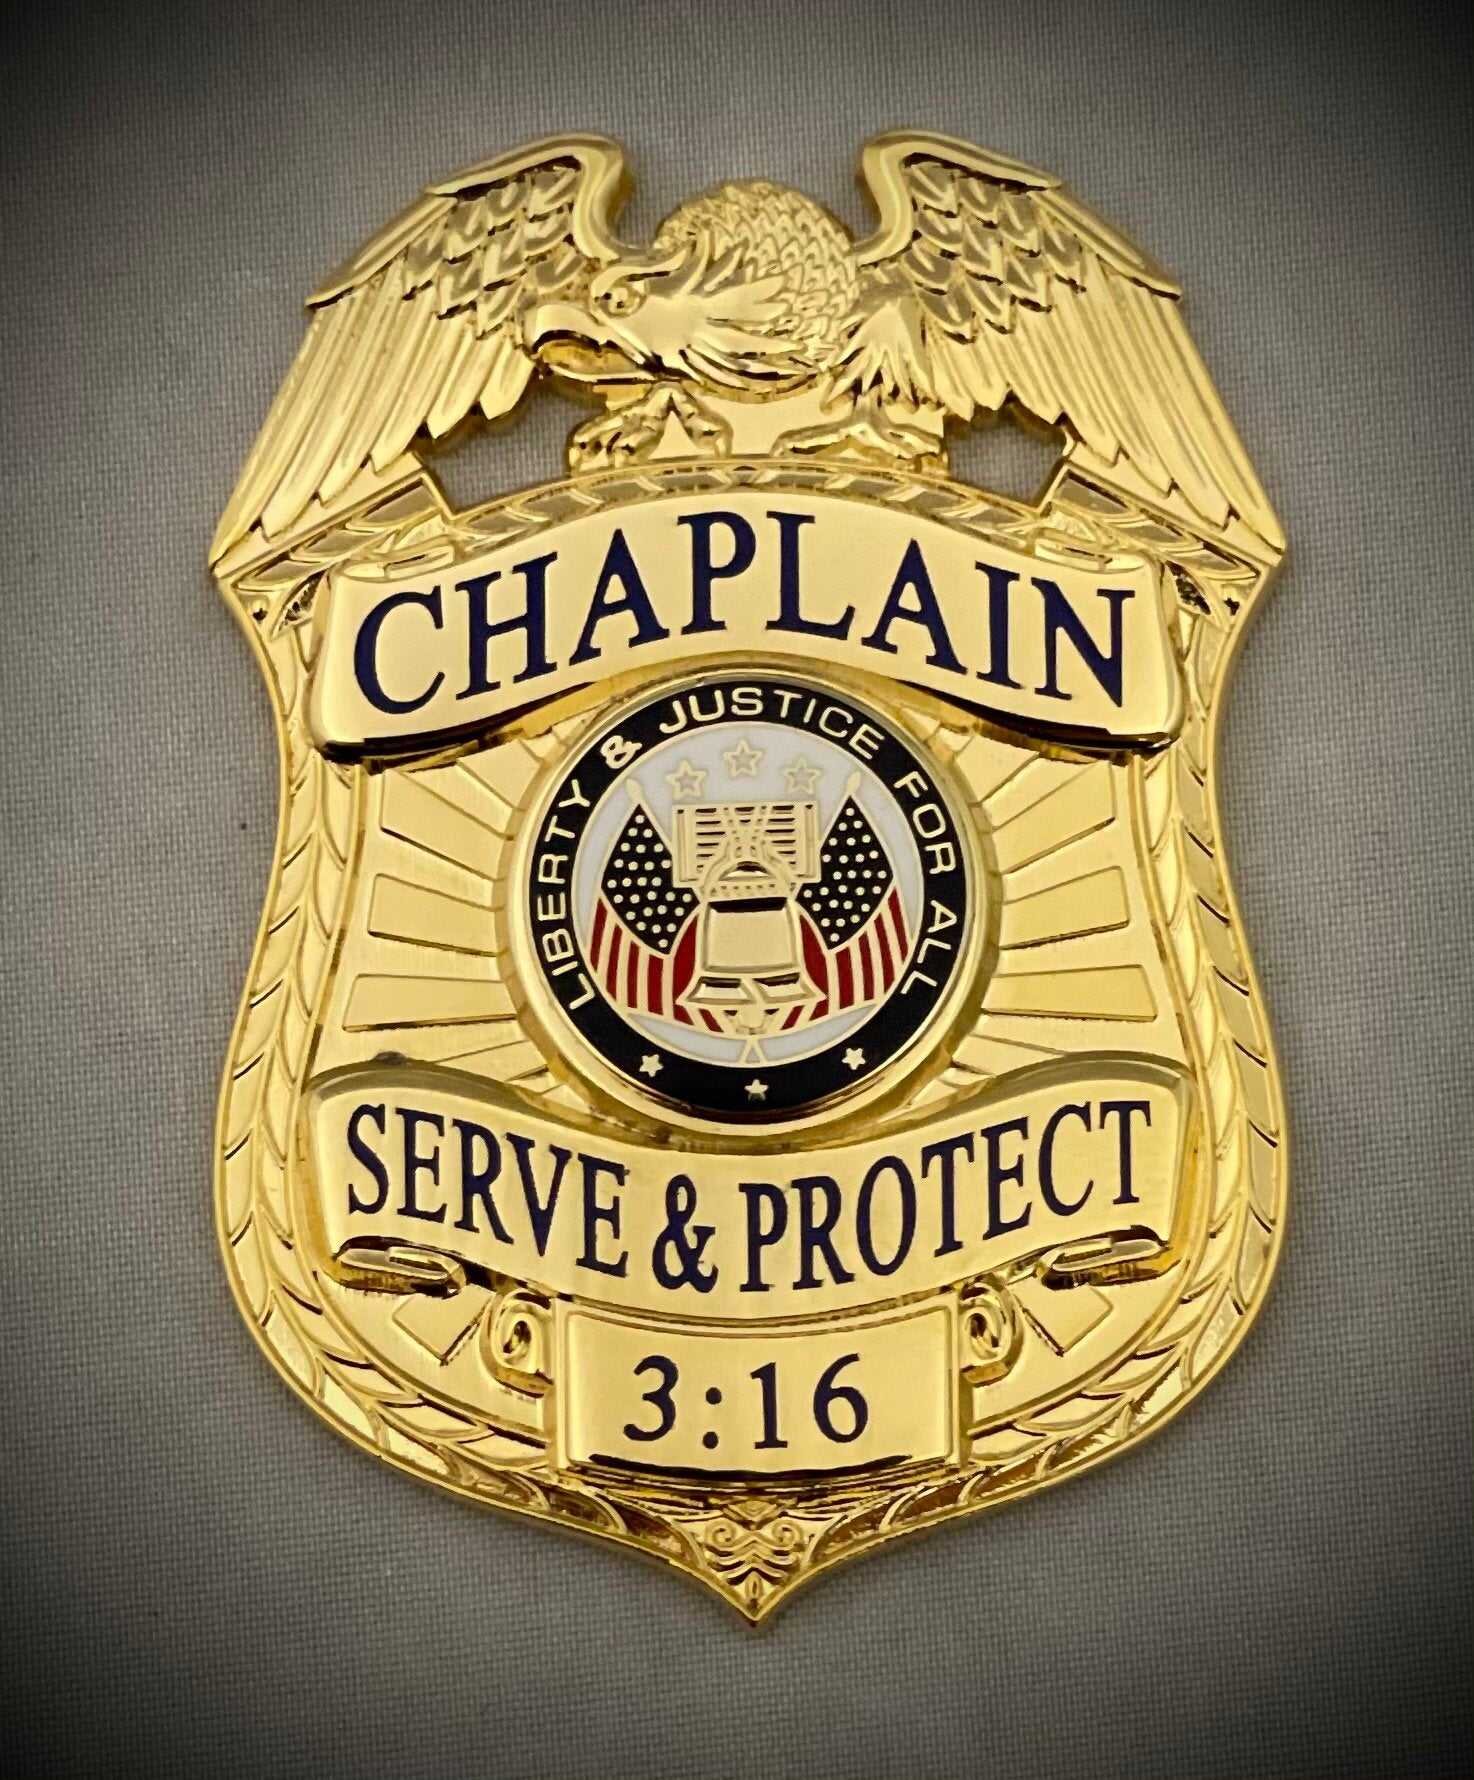 Chaplain Serve and Protect Gold Badge and 2 Nameplates leather ID holder